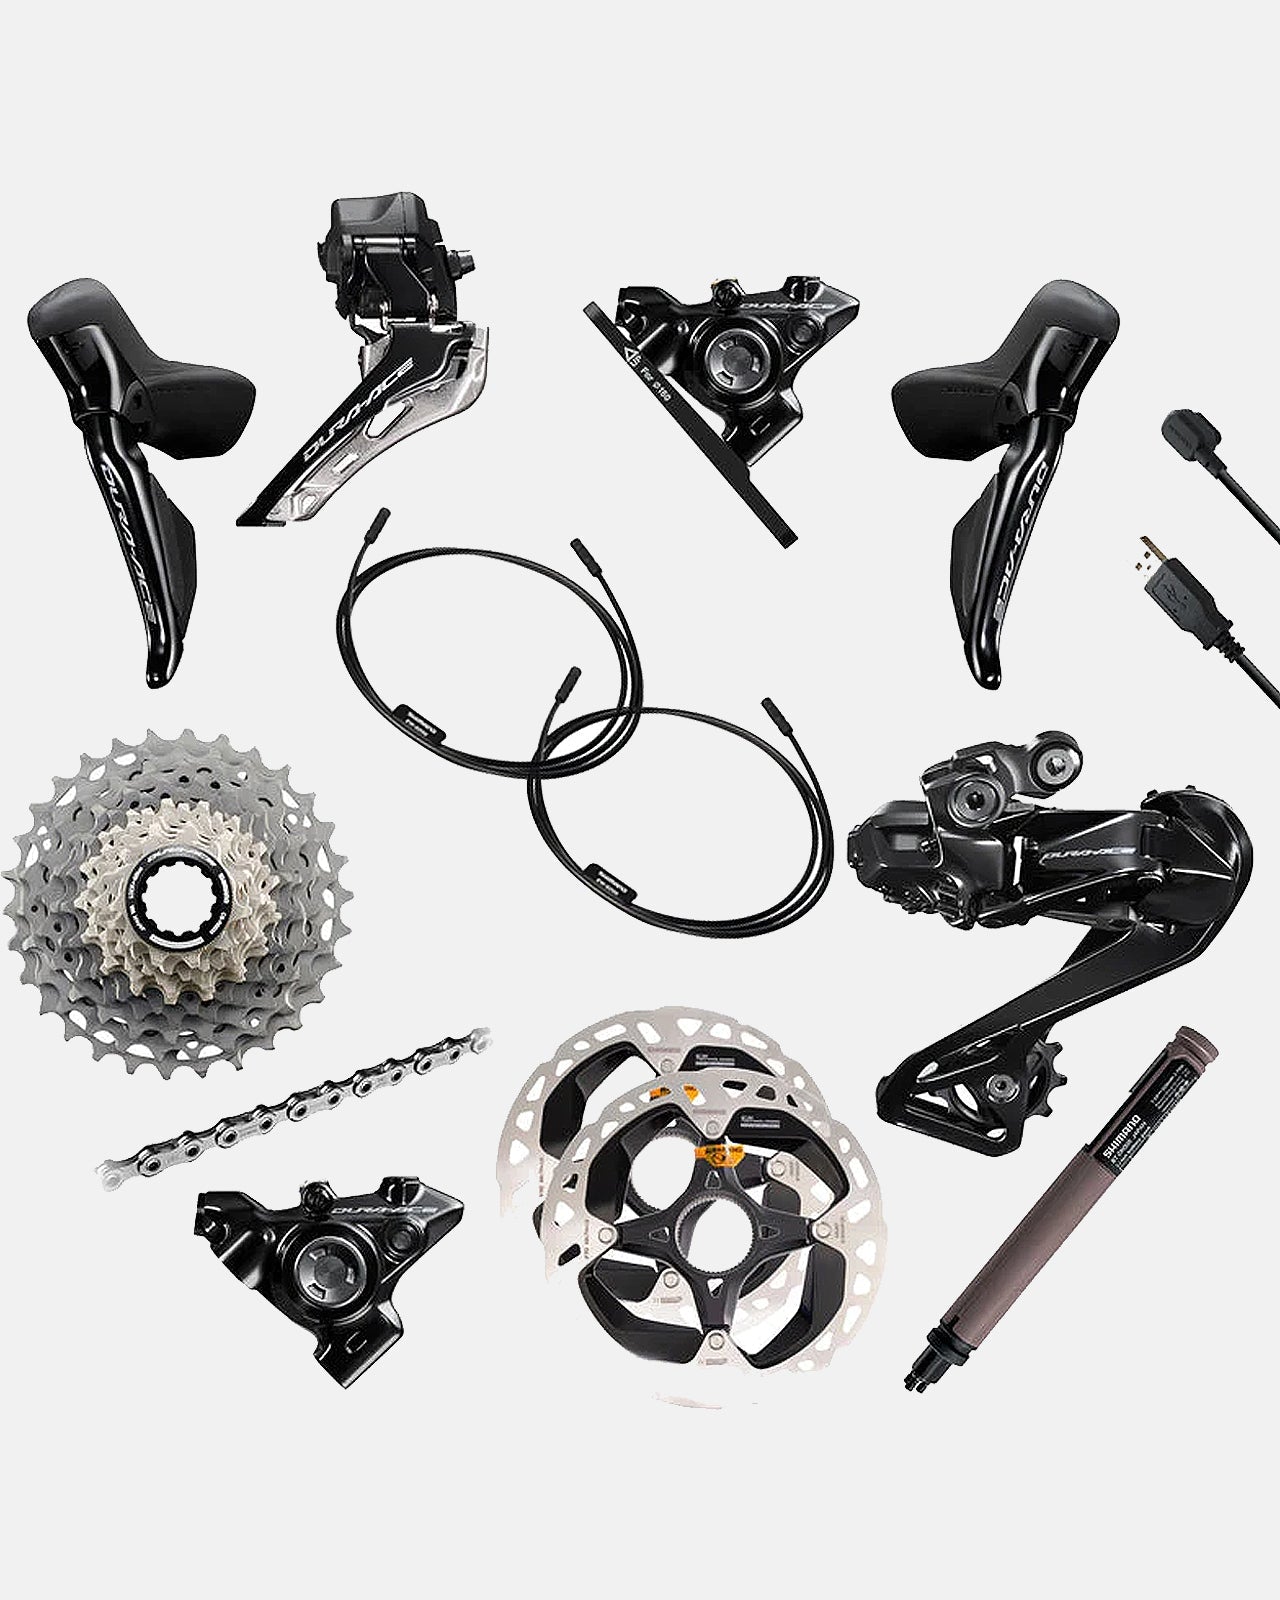 Shimano Dura-Ace 12-Speed 9270 Upgrade Kit - Disc | Enroute.cc